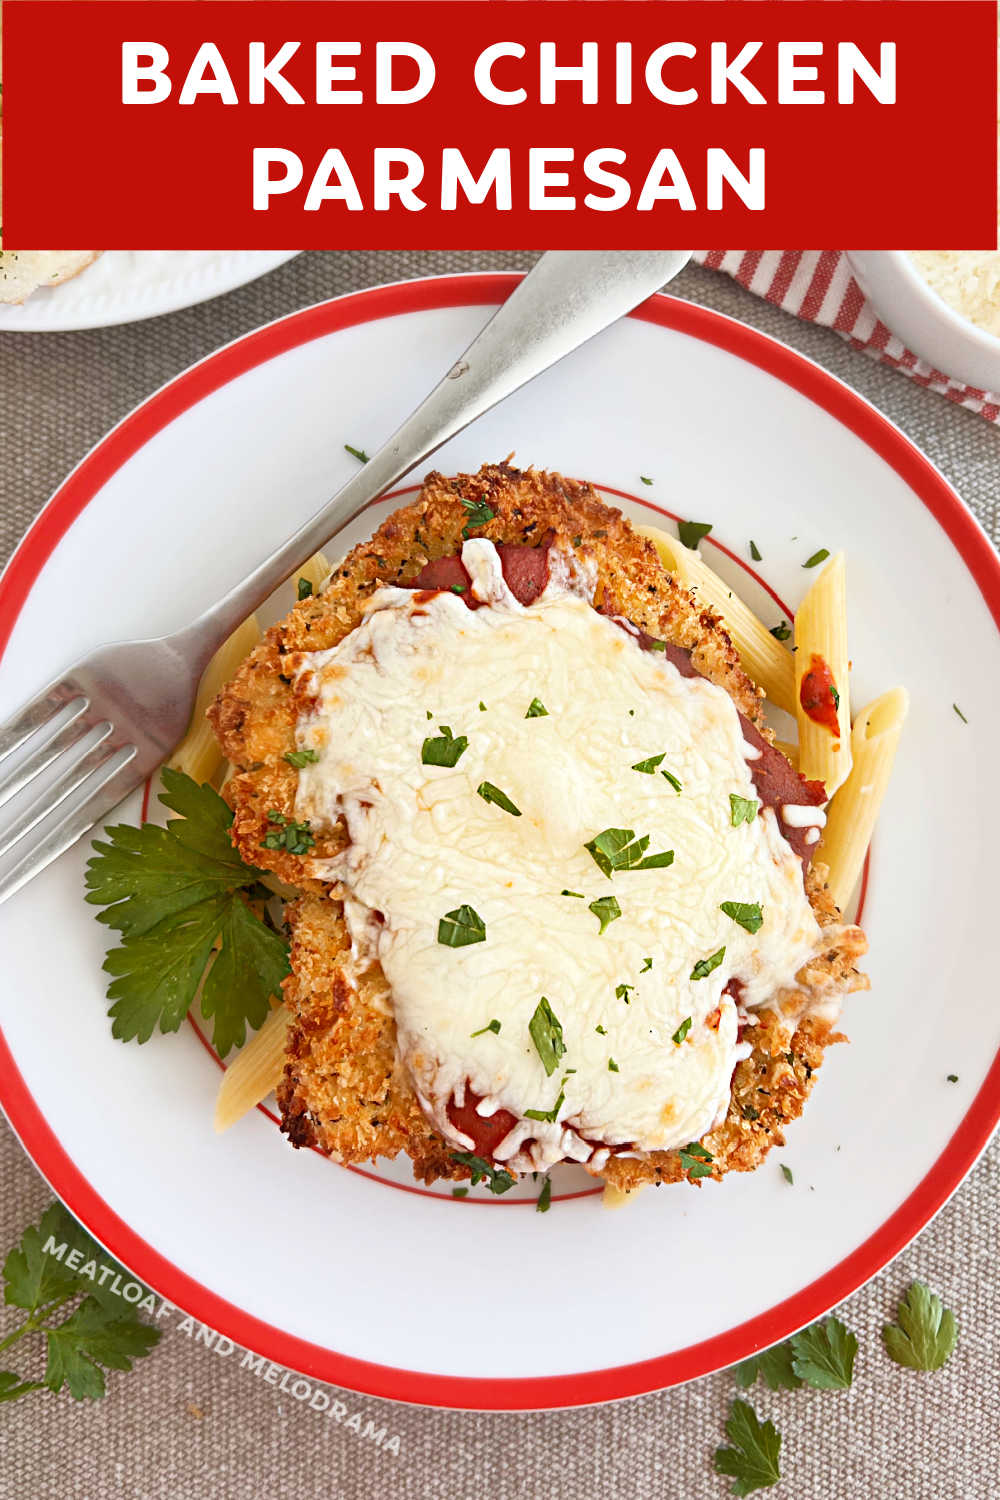 This Easy Baked Chicken Parmesan Recipe has a crispy panko bread crumbs Parmesan cheese coating topped with marinara sauce and melted mozzarella cheese. Serve this chicken Parm recipe with penne pasta for an easy weeknight meal the whole family will love! via @meamel